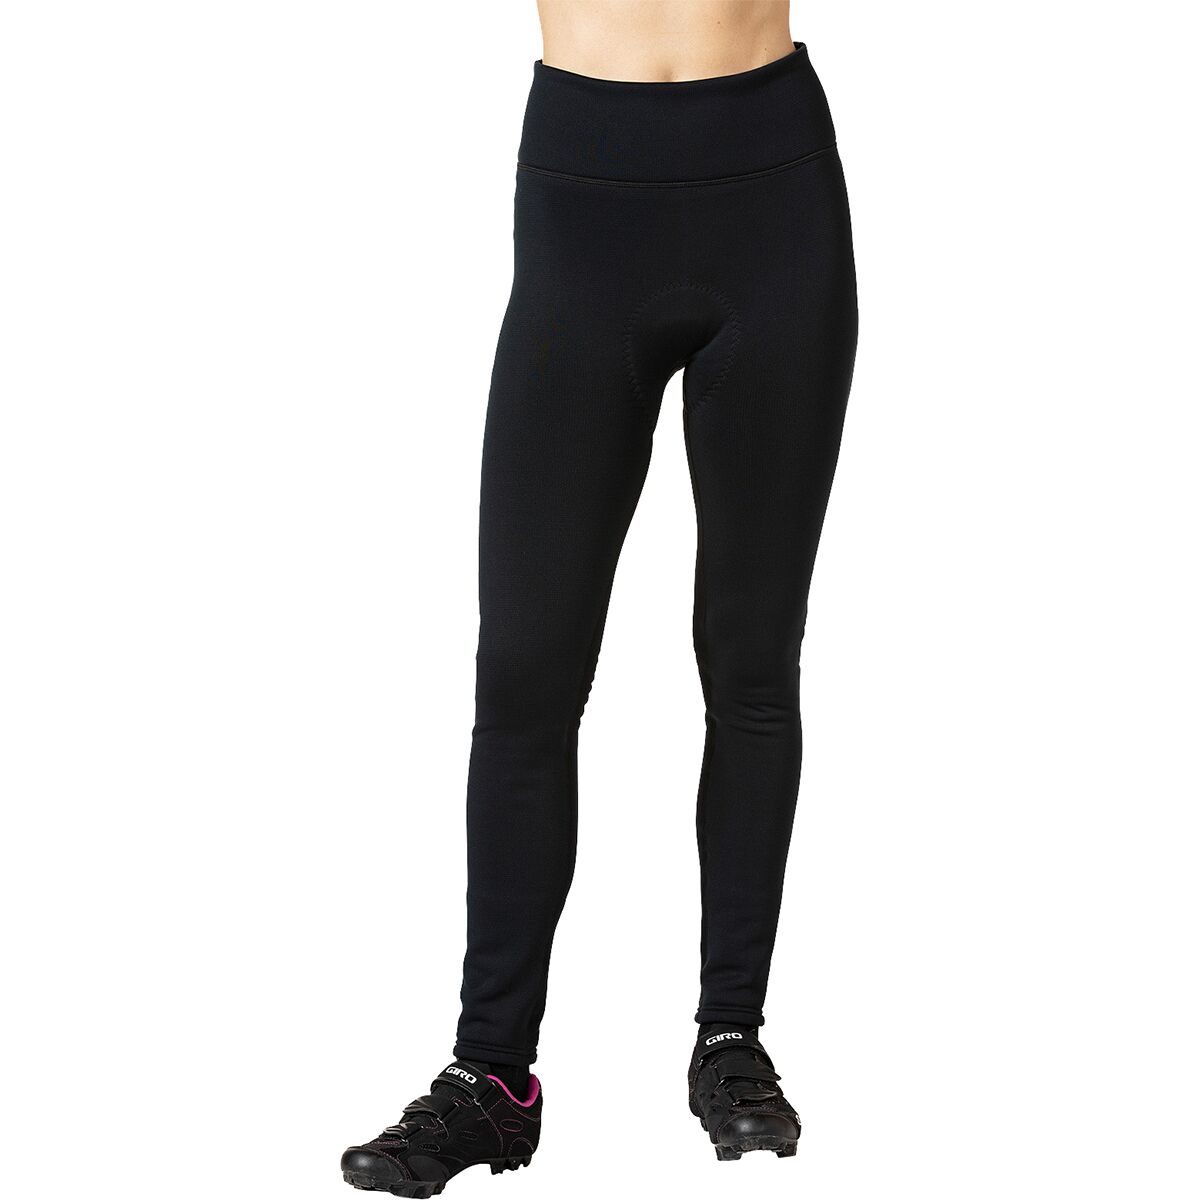 Terry Bicycles Winter Tight - Women's